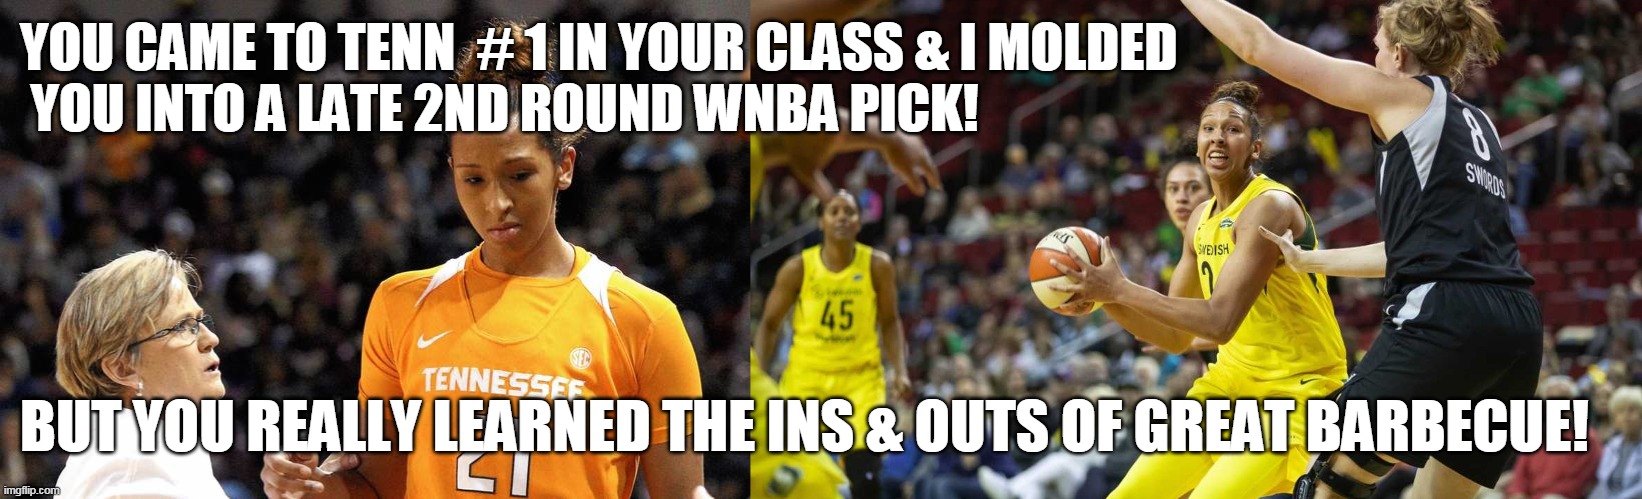 YOU CAME TO TENN  # 1 IN YOUR CLASS & I MOLDED
 YOU INTO A LATE 2ND ROUND WNBA PICK! BUT YOU REALLY LEARNED THE INS & OUTS OF GREAT BARBECUE! | made w/ Imgflip meme maker